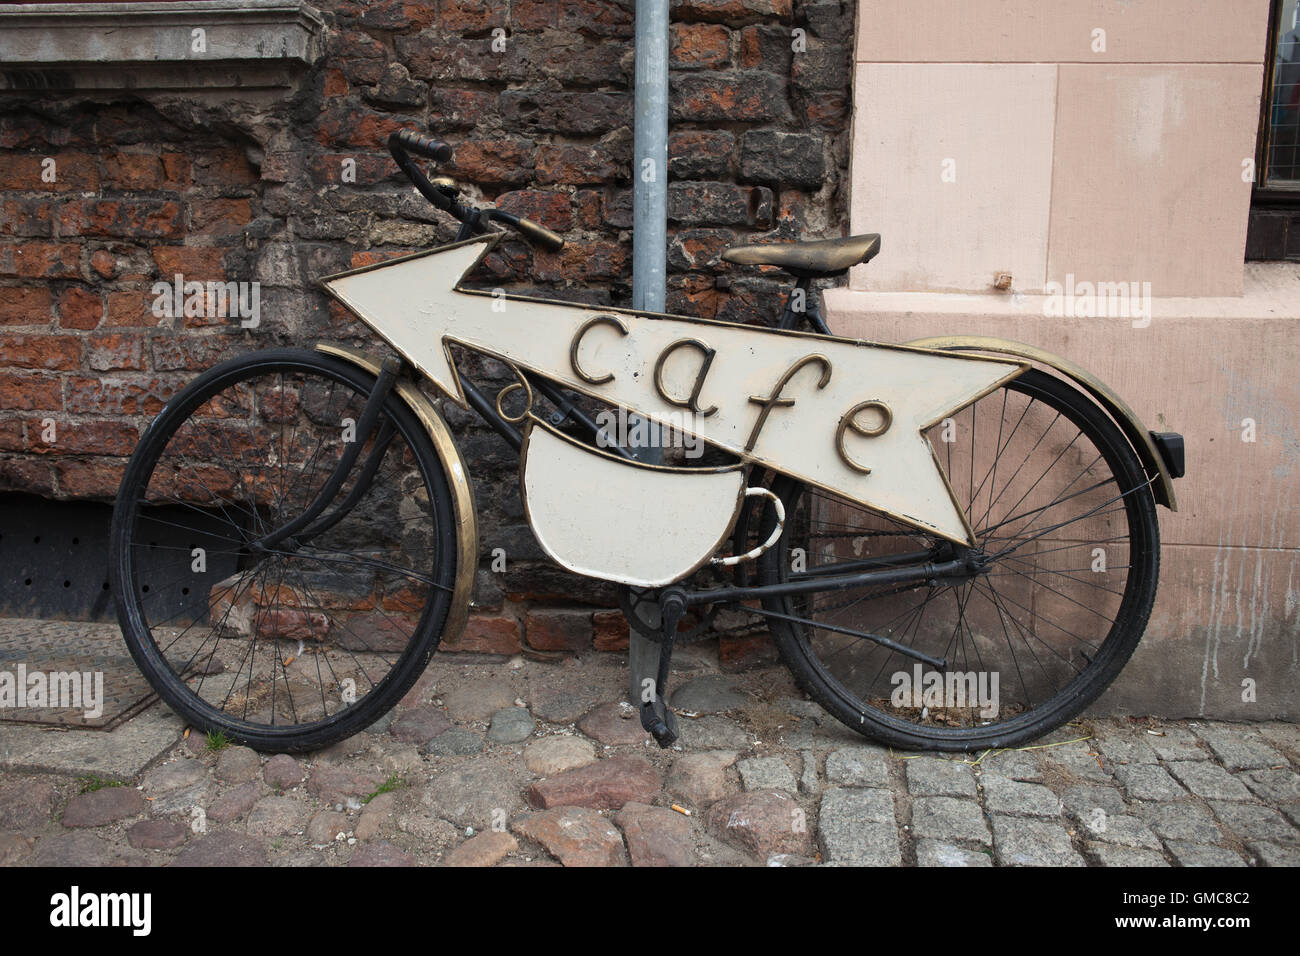 Vintage retro classic city bike, bicycle with an arrow sign pointing to a cafe Stock Photo